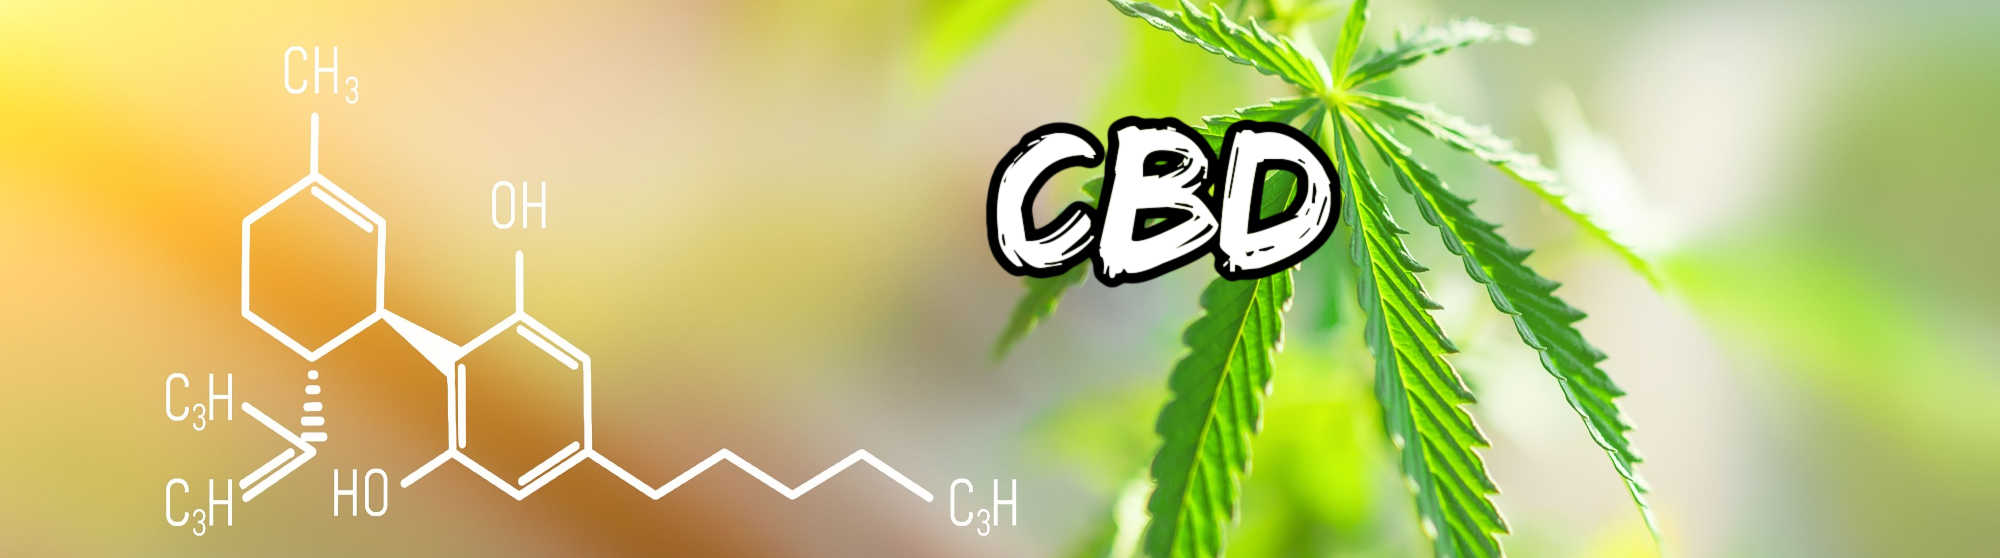 image of what is cbd